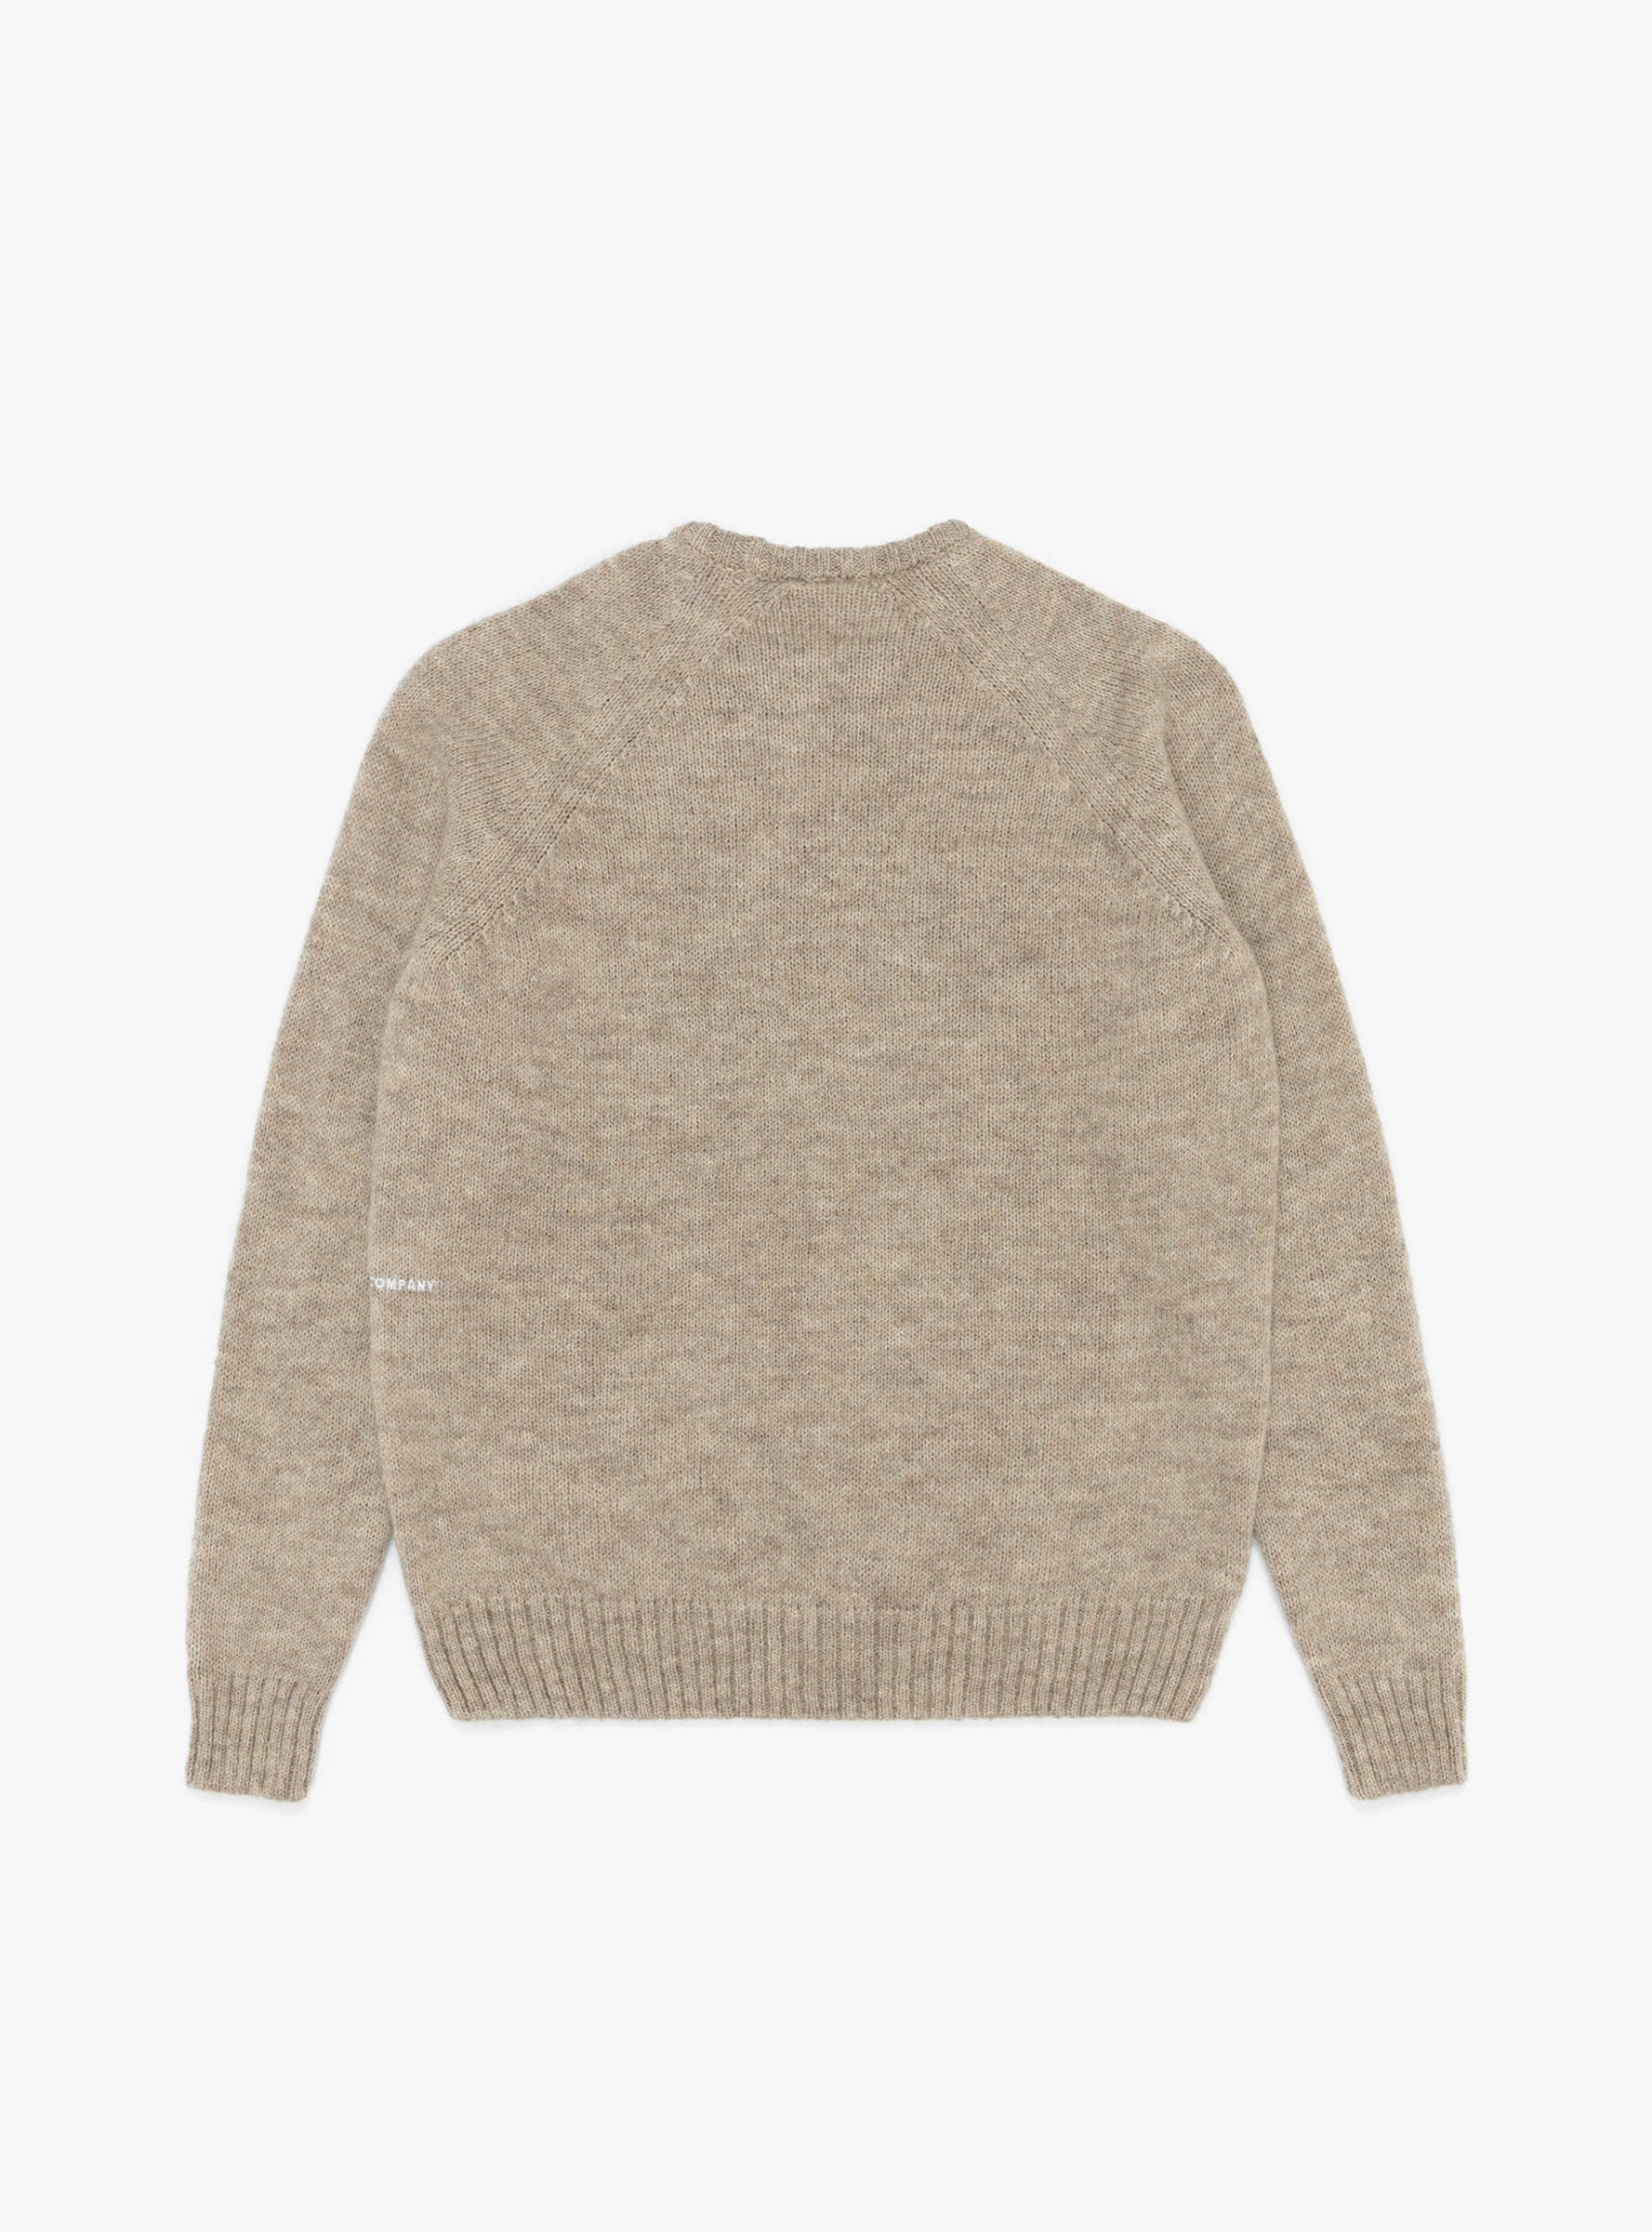 Pop Trading Company Pop Trading Company Initials Knitted Crewneck Sesame - Size: XL